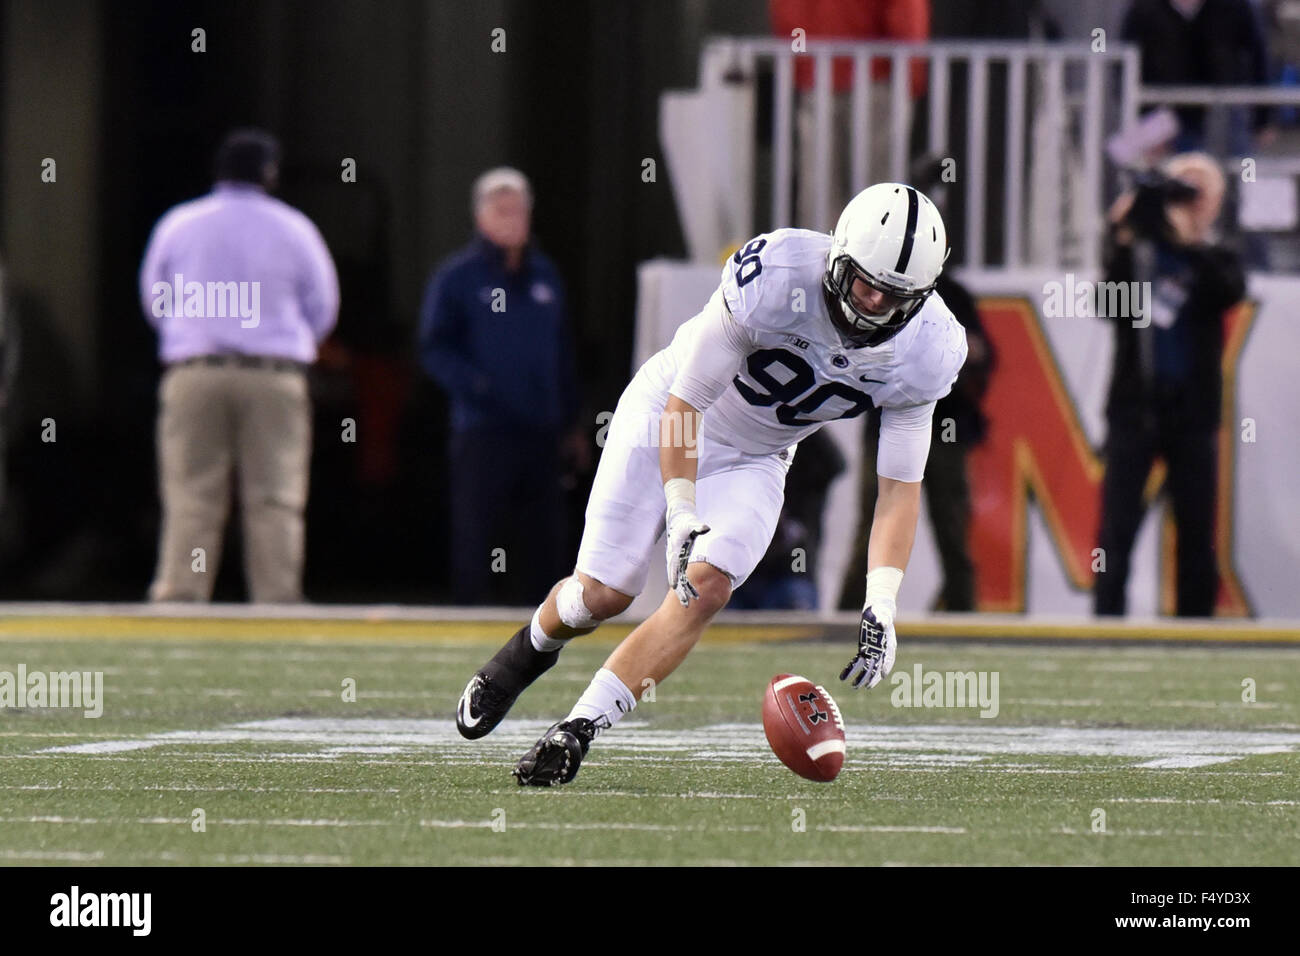 Baltimore, Maryland, USA. 24th Oct, 2015. Penn State Nittany Lions defensive end GARRETT SICKLES (90) scoops up a fumble in the open field during the Big 10 conference football game at M&T Bank Stadium in Baltimore, MD. Penn State won 31-30. © Ken Inness/ZUMA Wire/Alamy Live News Stock Photo